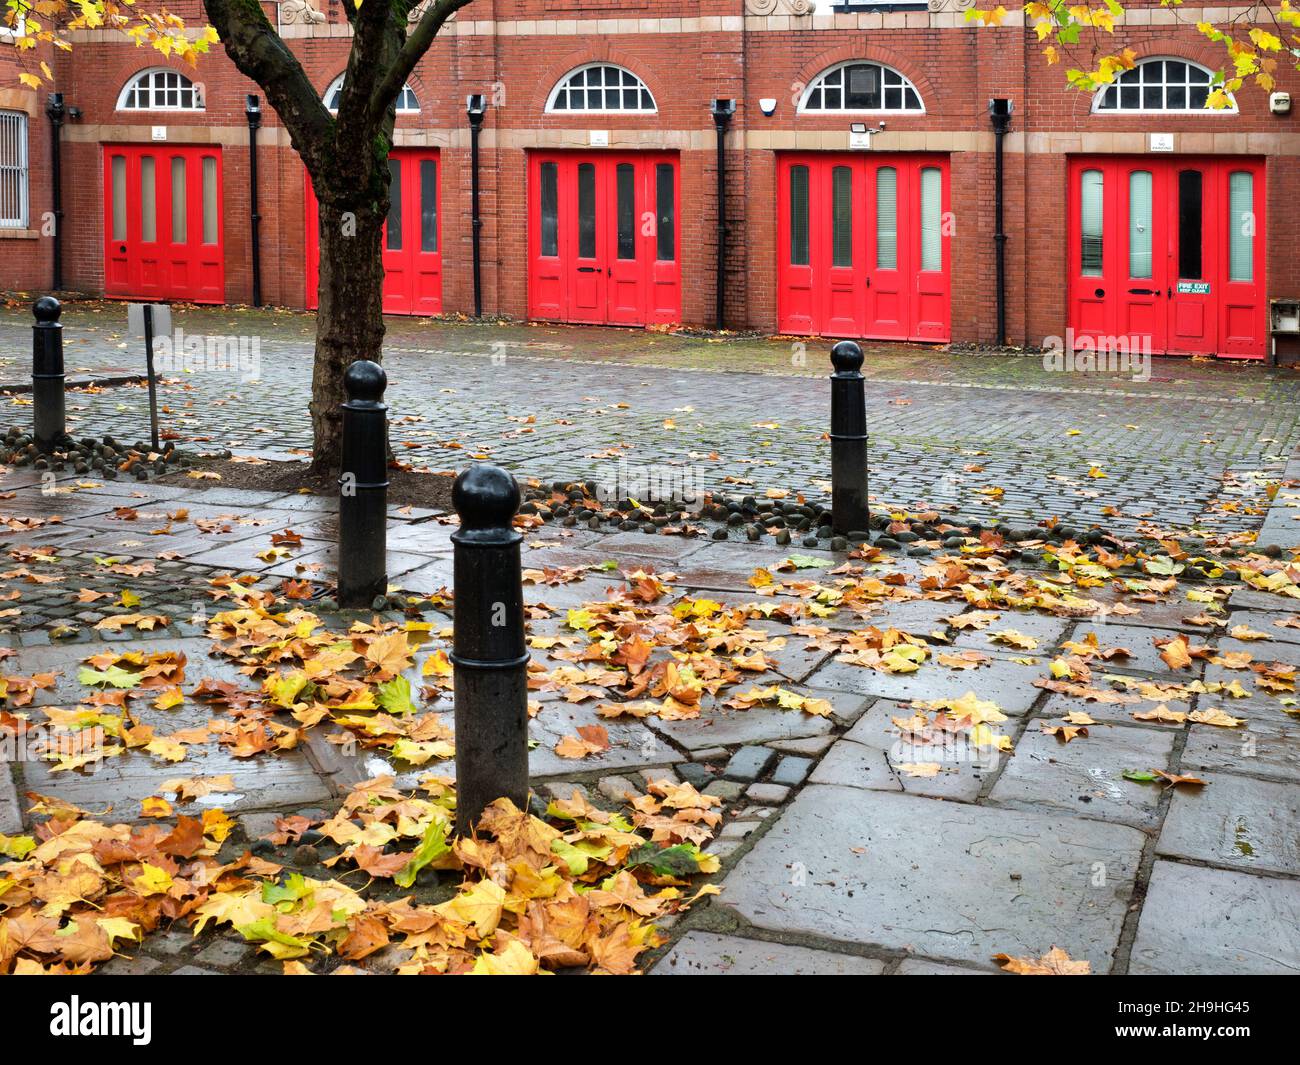 Porte rosse presso l'Old Fire Station Albert Bentley Place City di Salford Greater Manchester Inghilterra Foto Stock